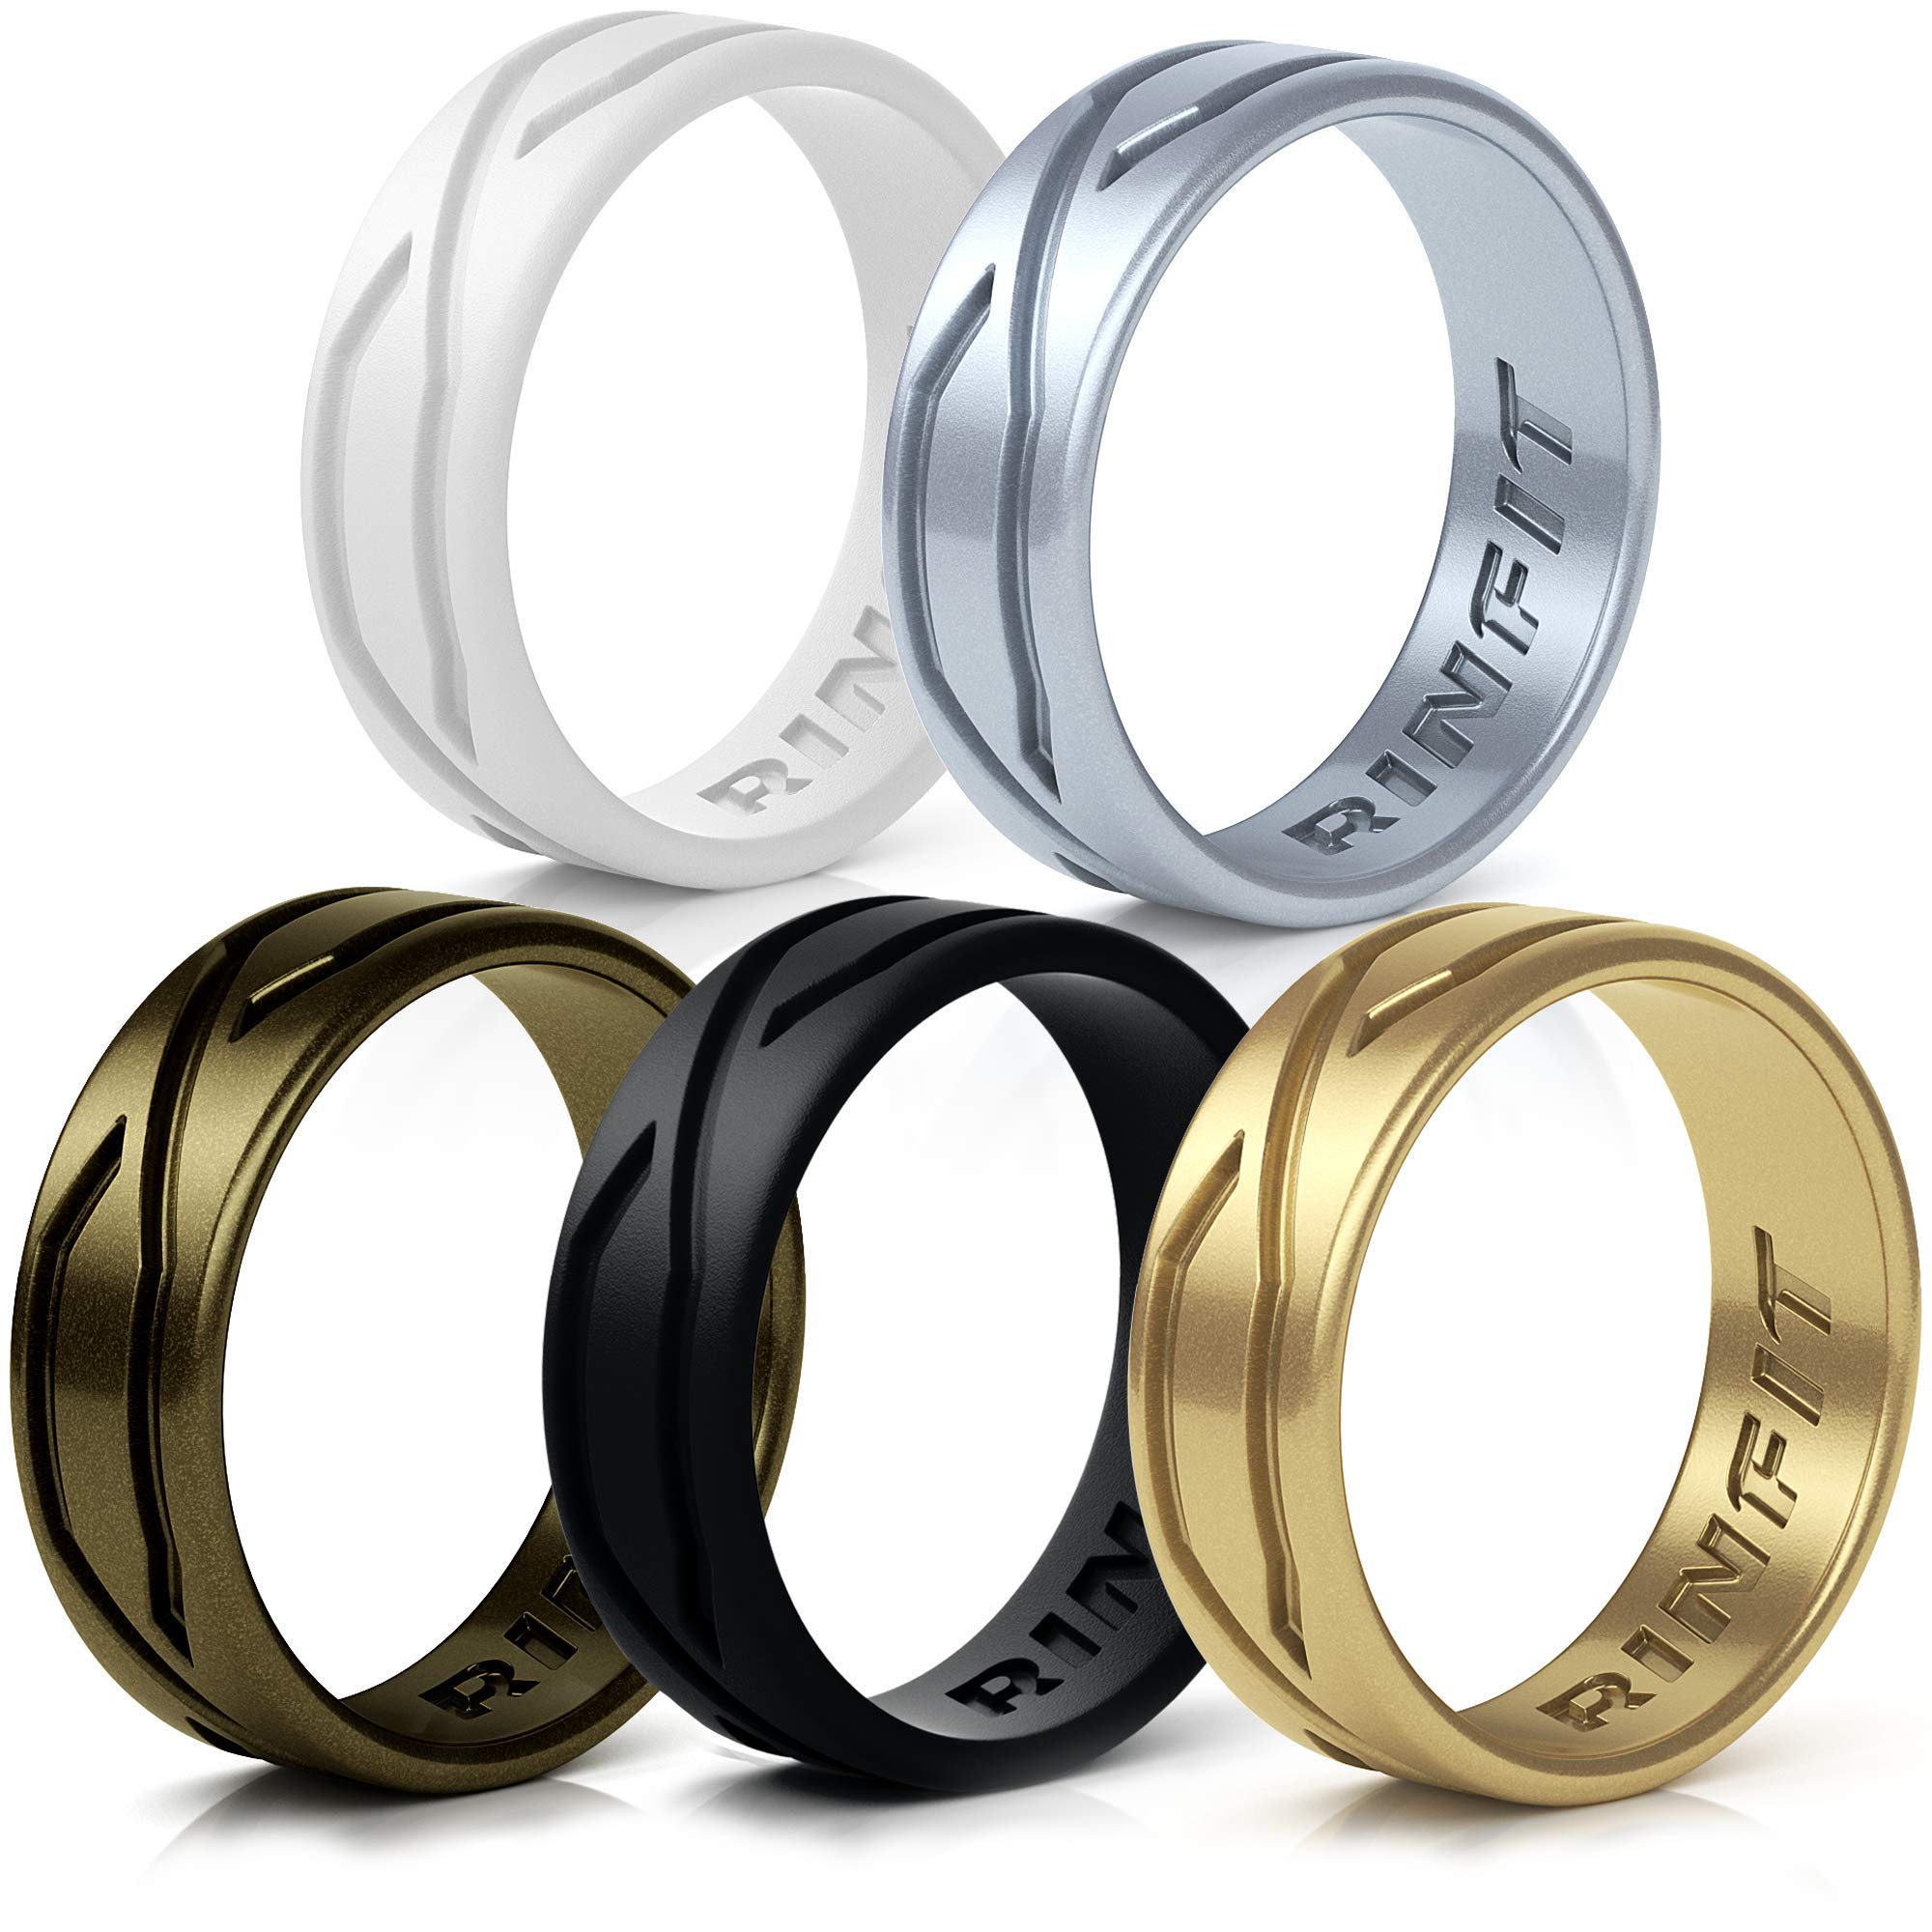 Rinfit Silicone Rings for Women - Silicone Wedding Bands Sets for Her - Patented Design Rubber Wedding Rings - 4Love collection 